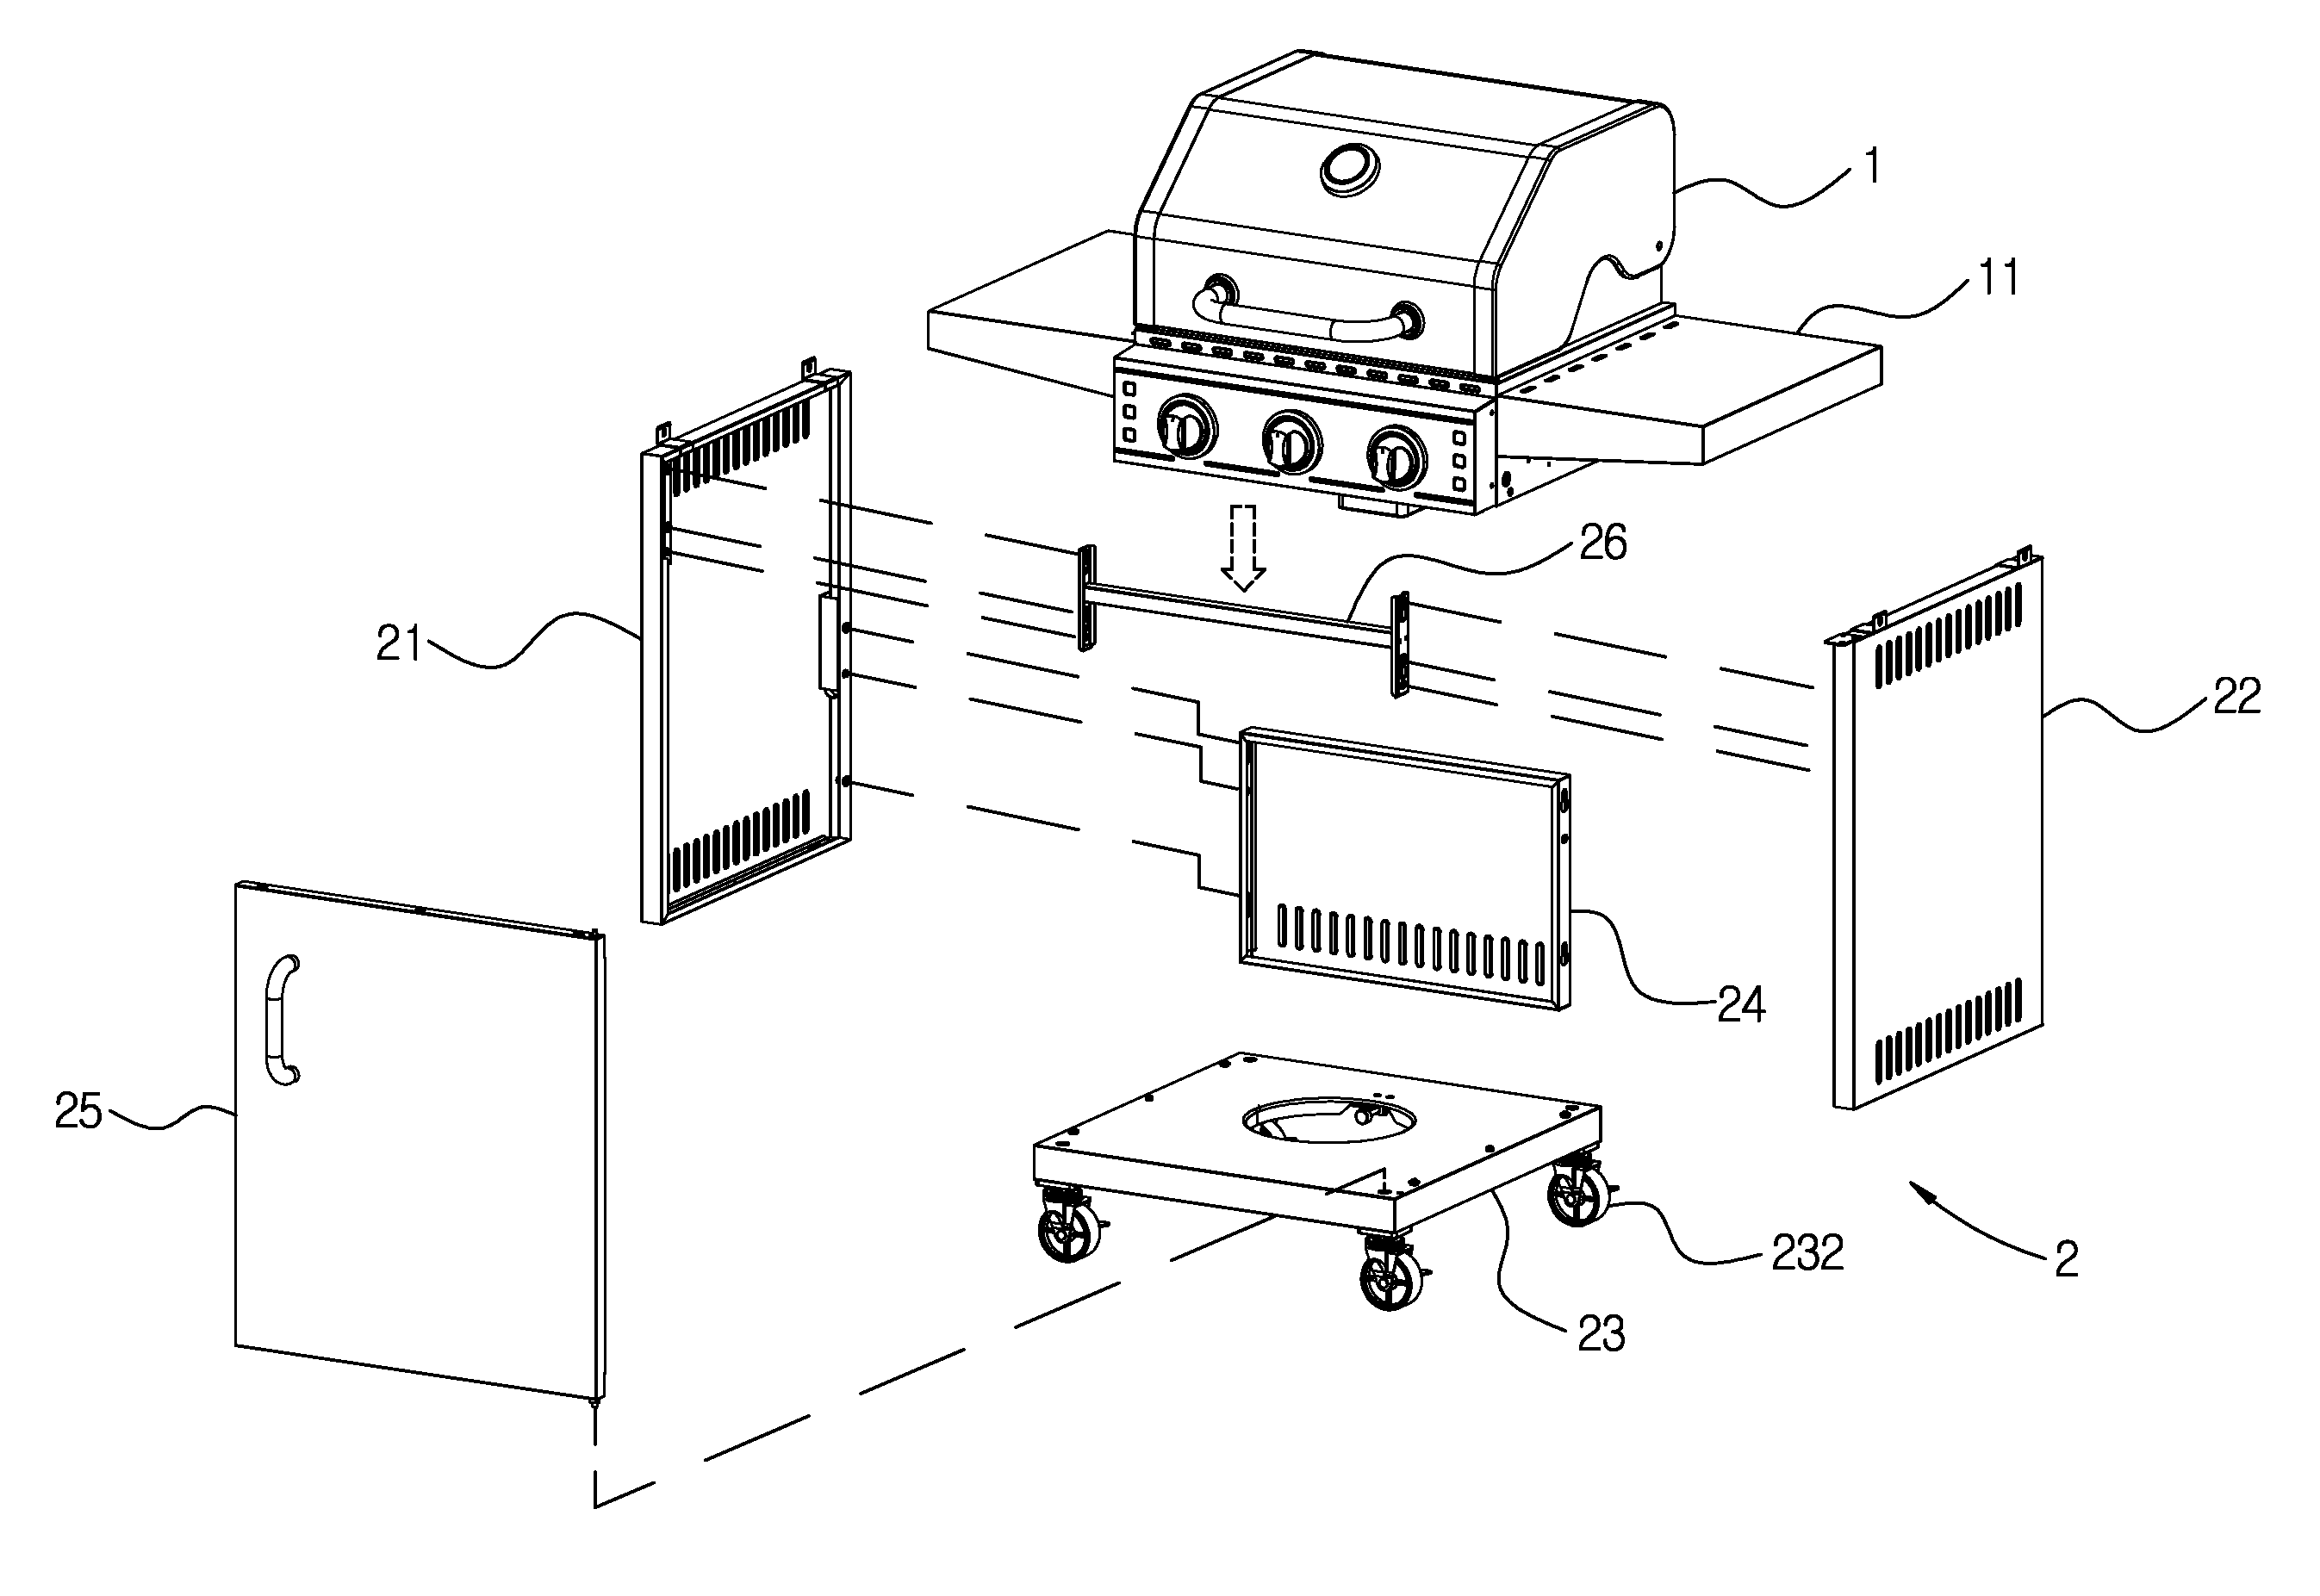 Connecting structure for barbecue grill